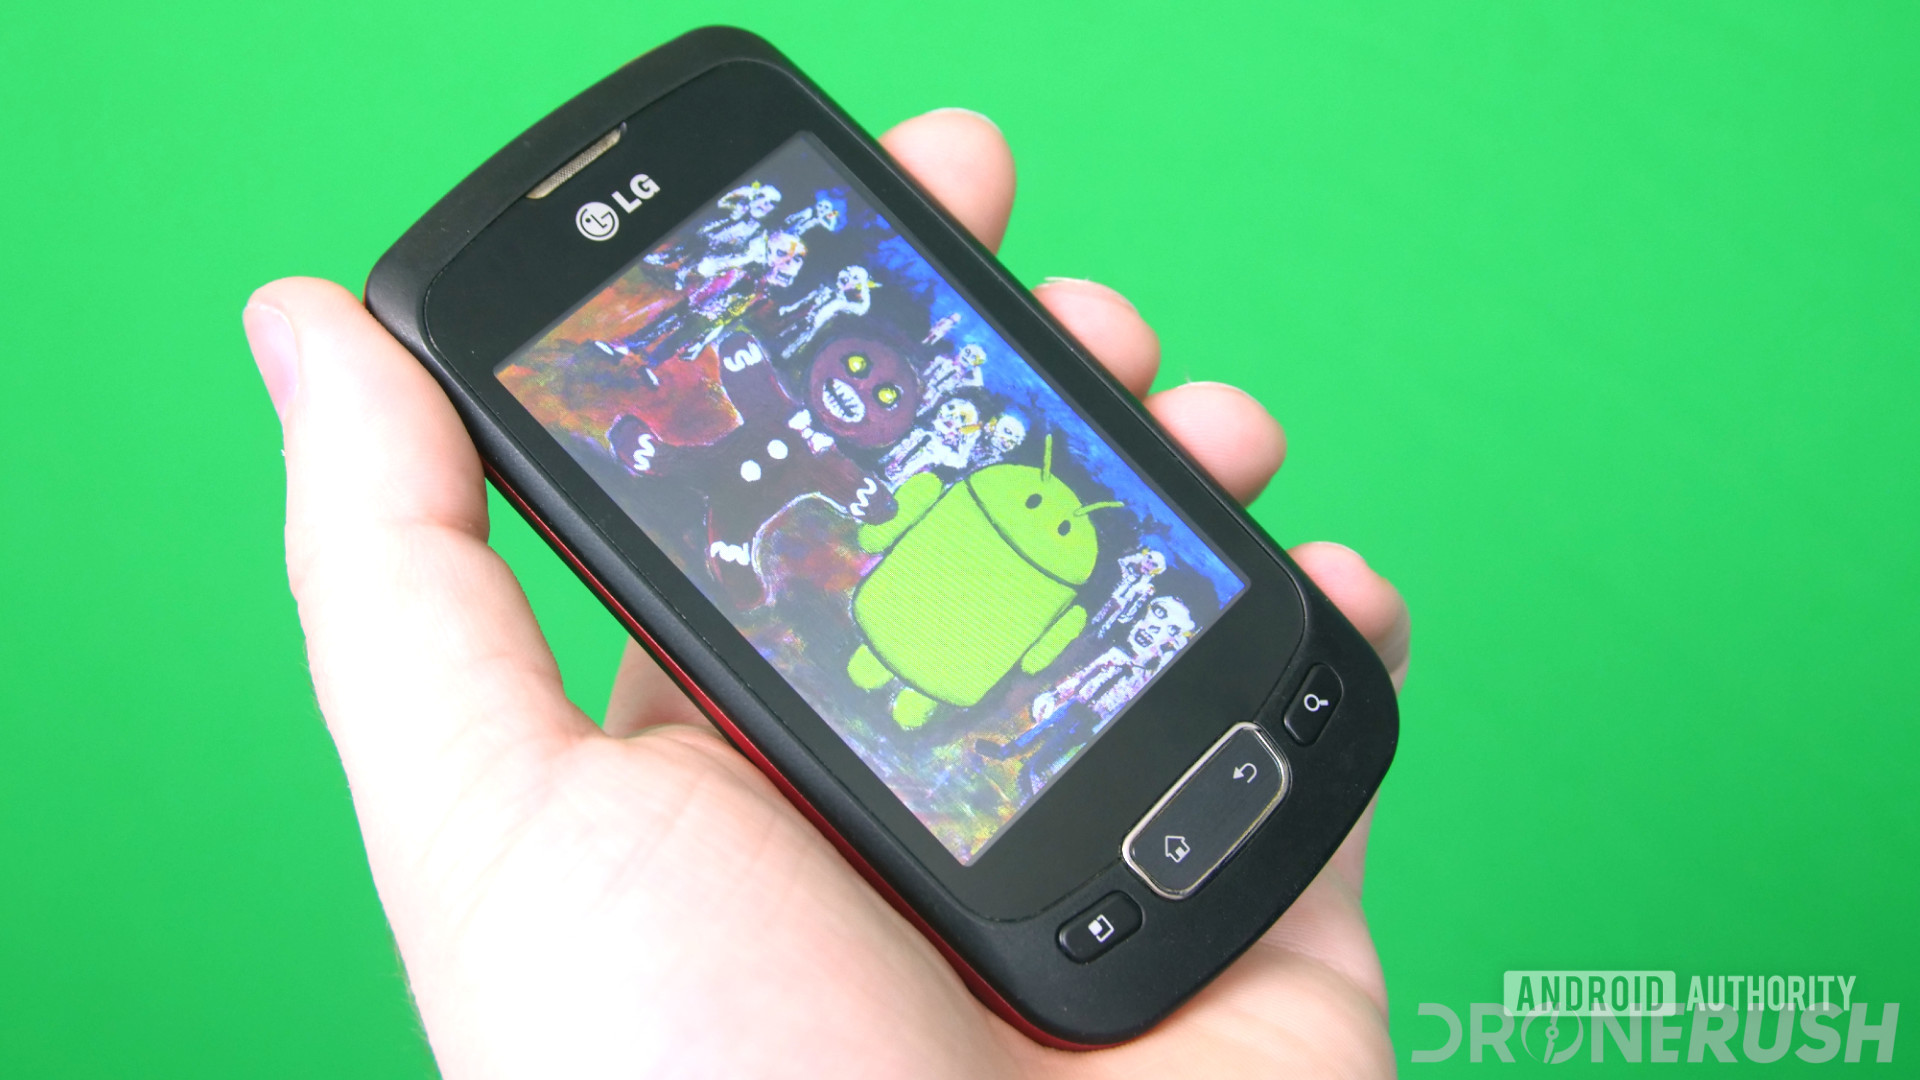 Android 2 Gingerbread Easter Egg in hand